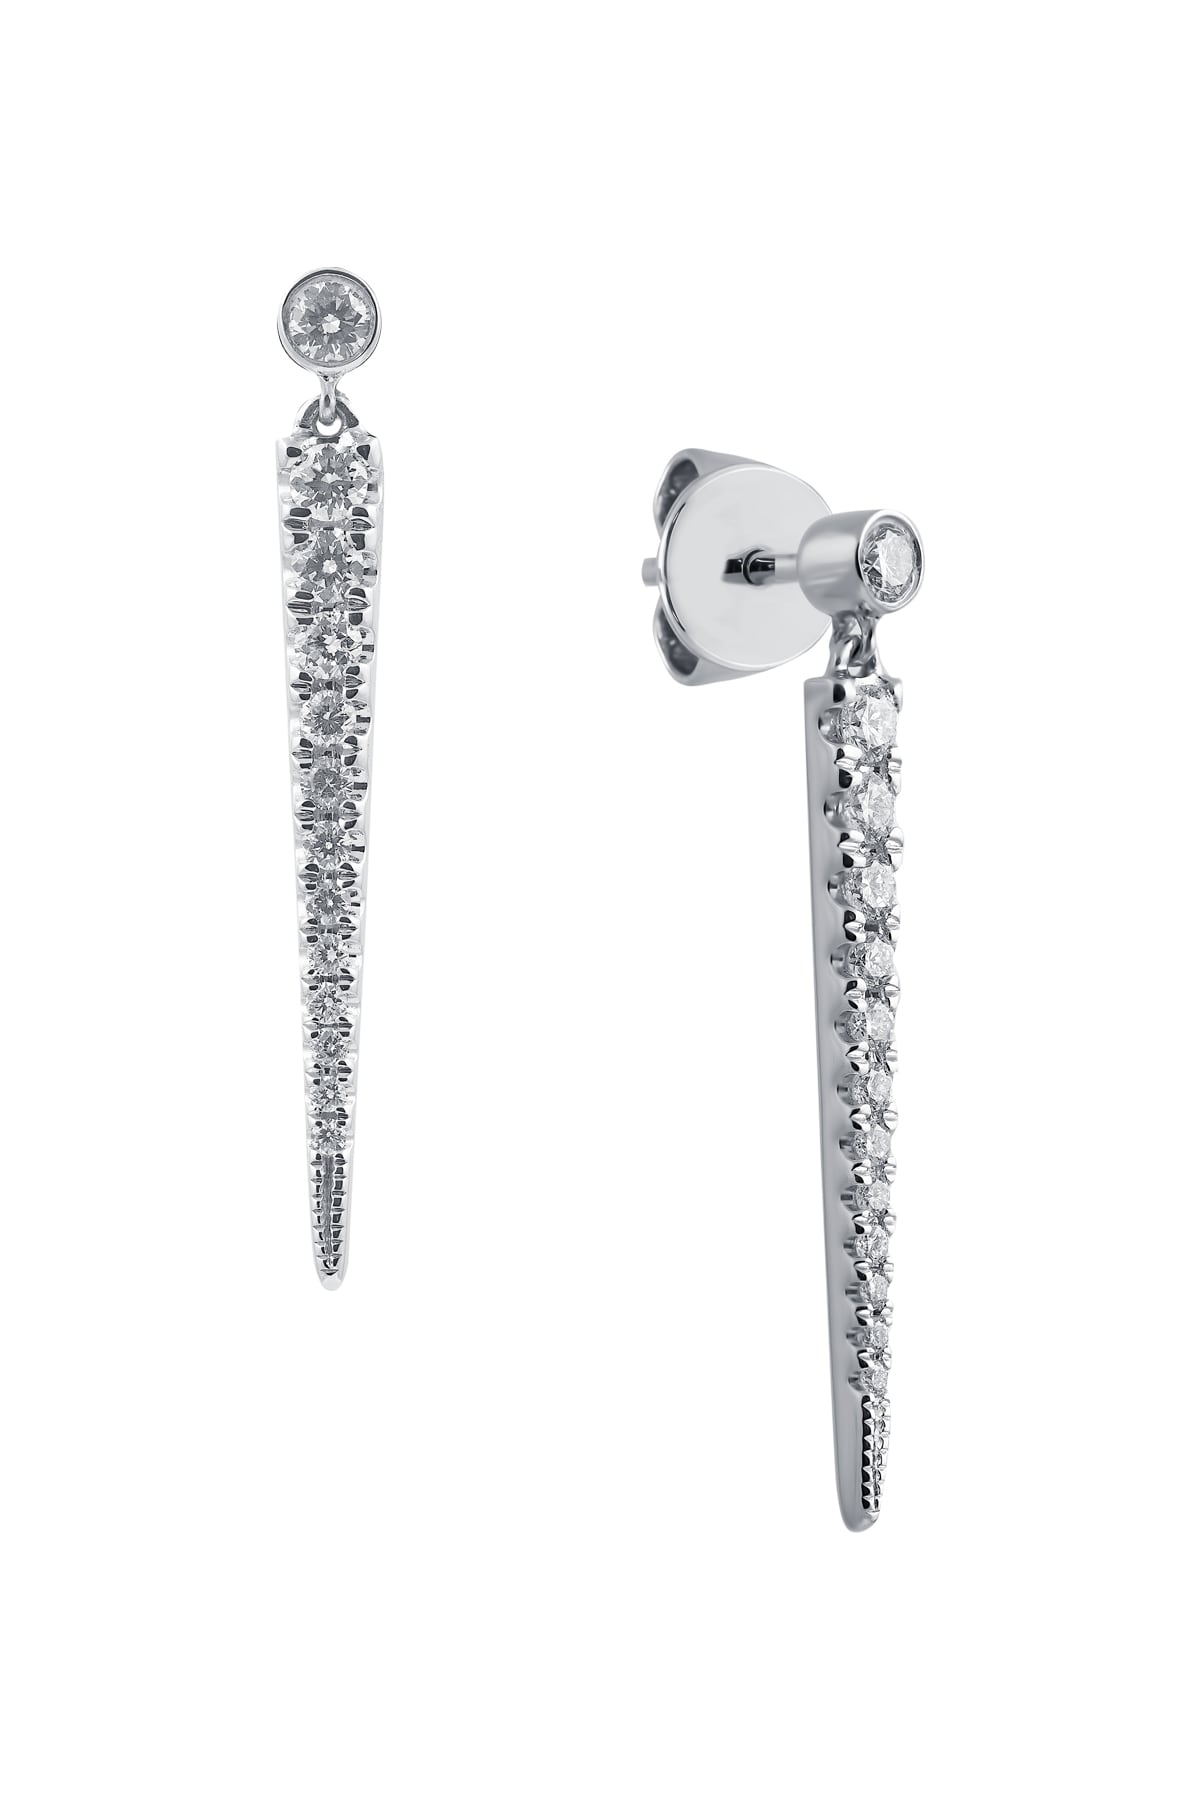 Tapered Diamond Drop Earrings from LeGassick.